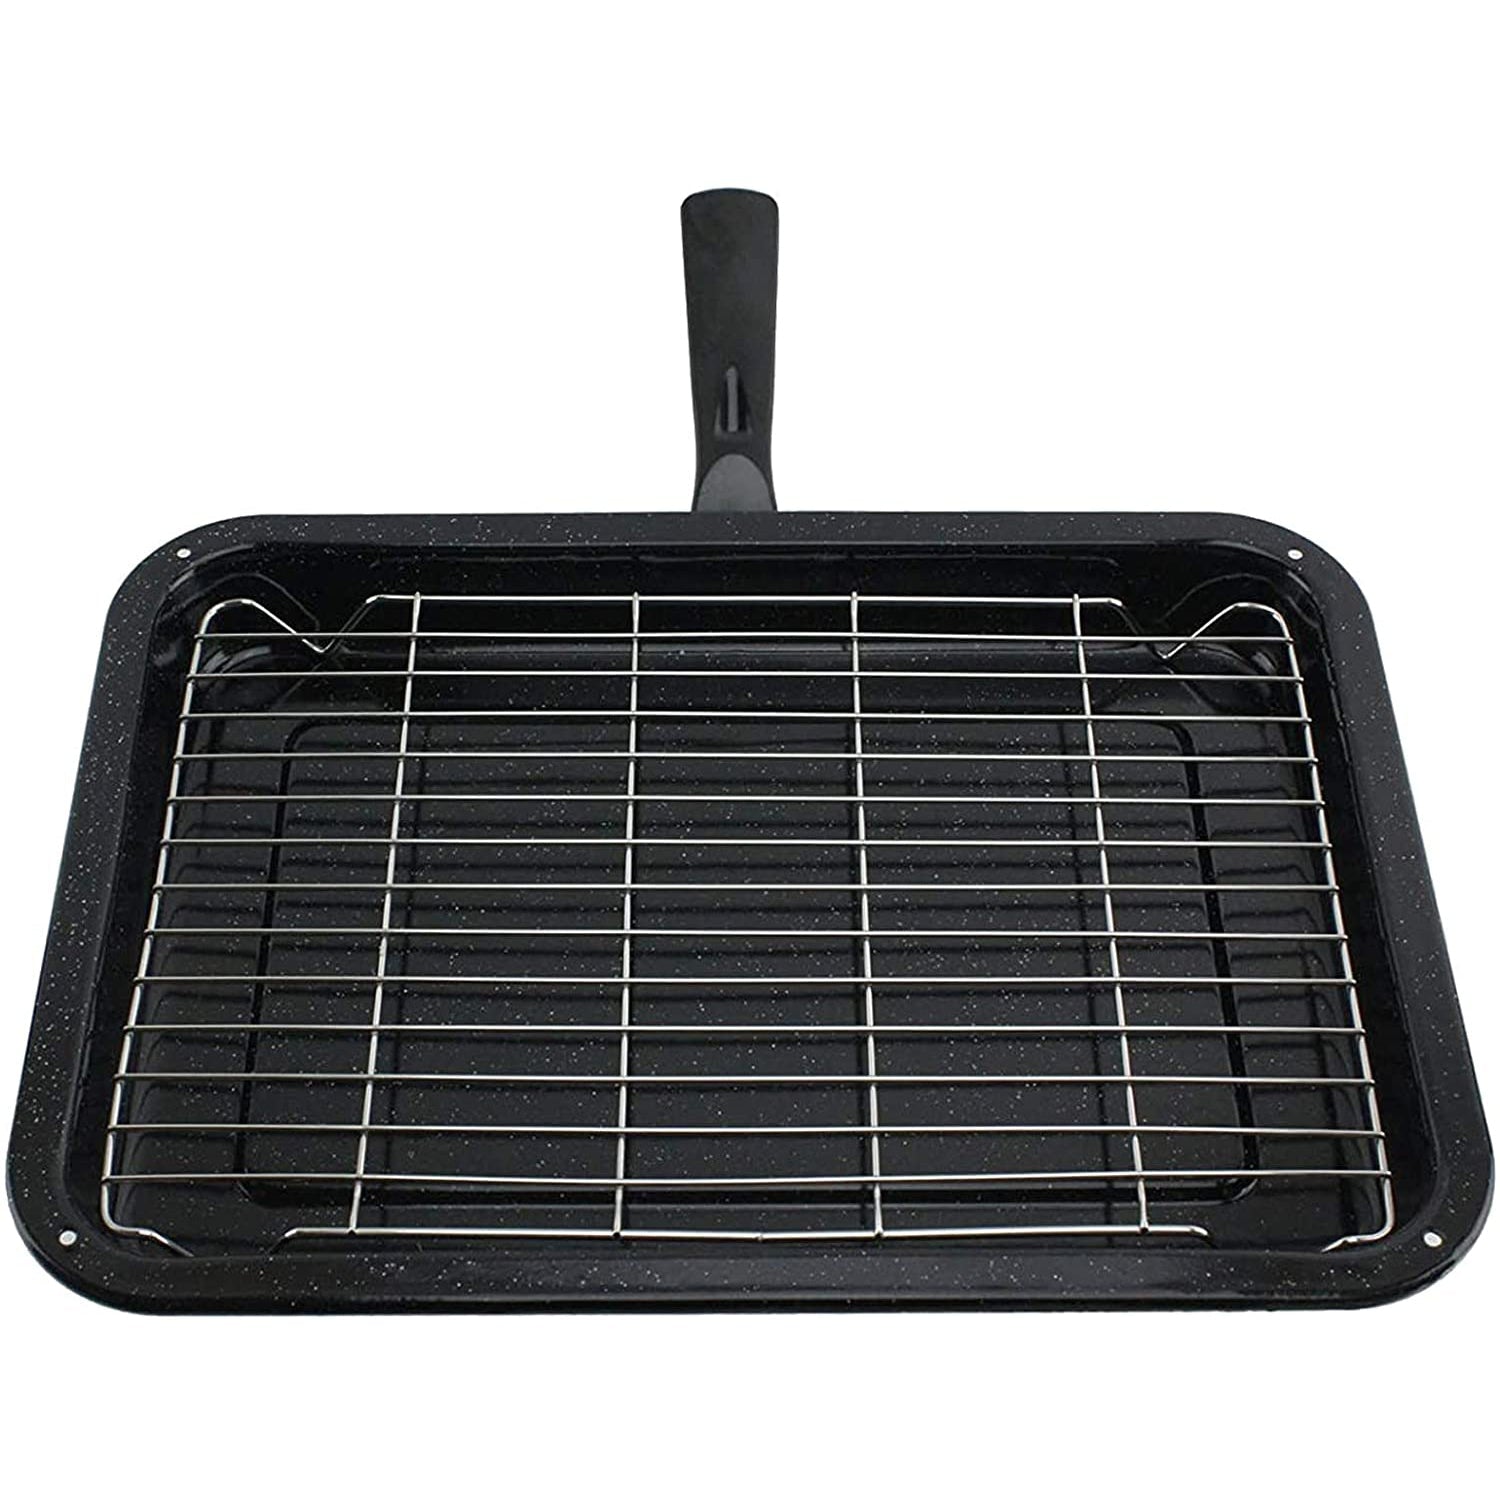 Small Grill Pan with Rack and Detachable Handle + Adjustable Grill Shelf for NEFF Oven Cooker